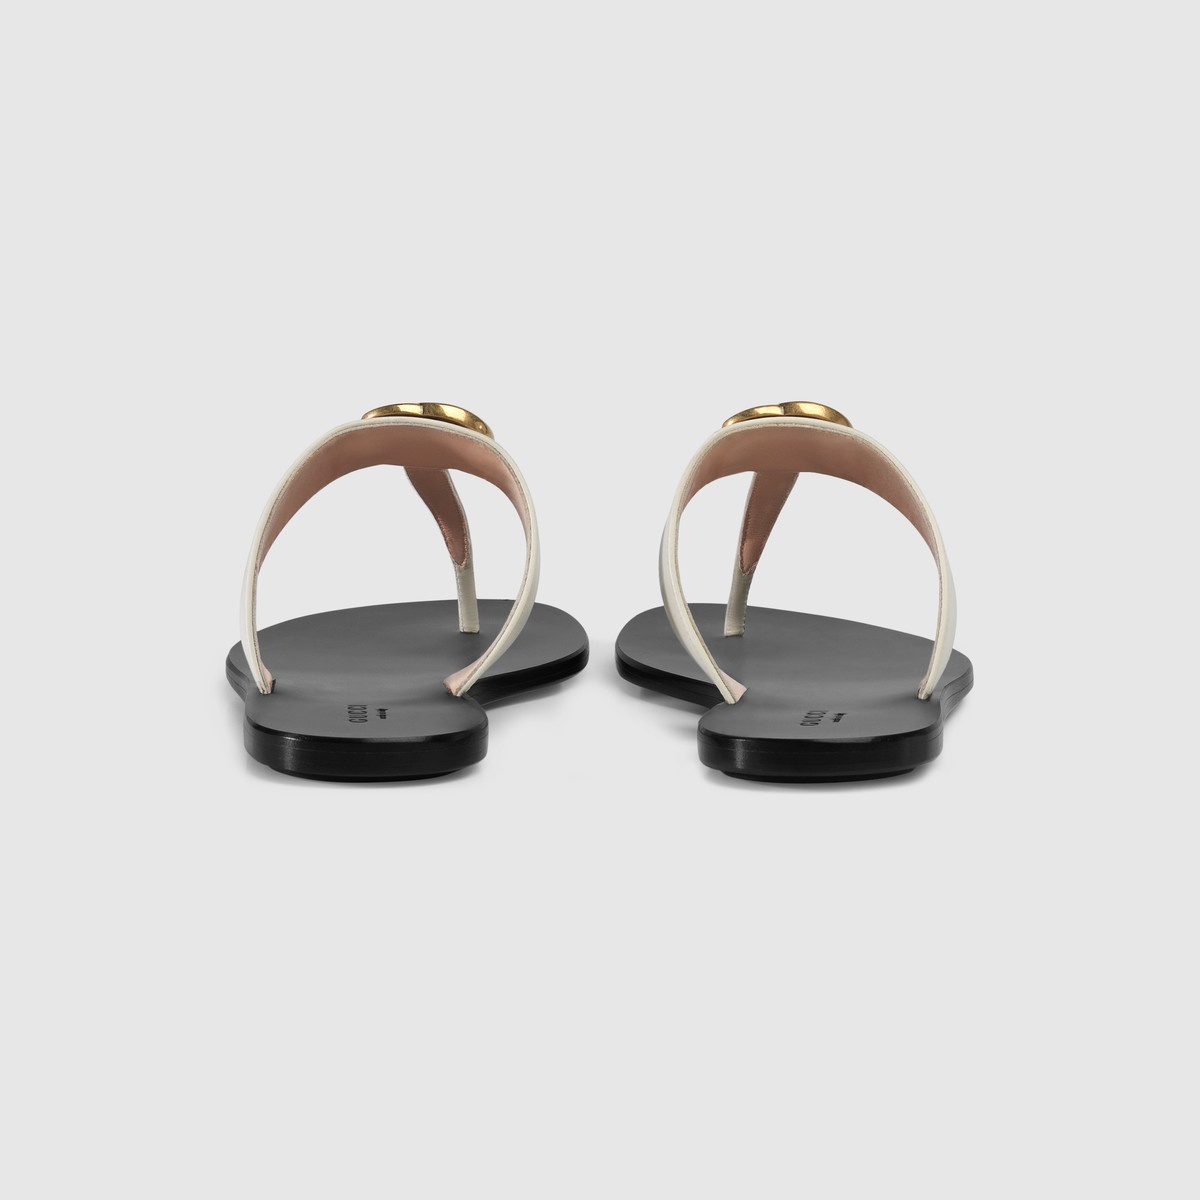 Leather thong sandal with Double G - 5